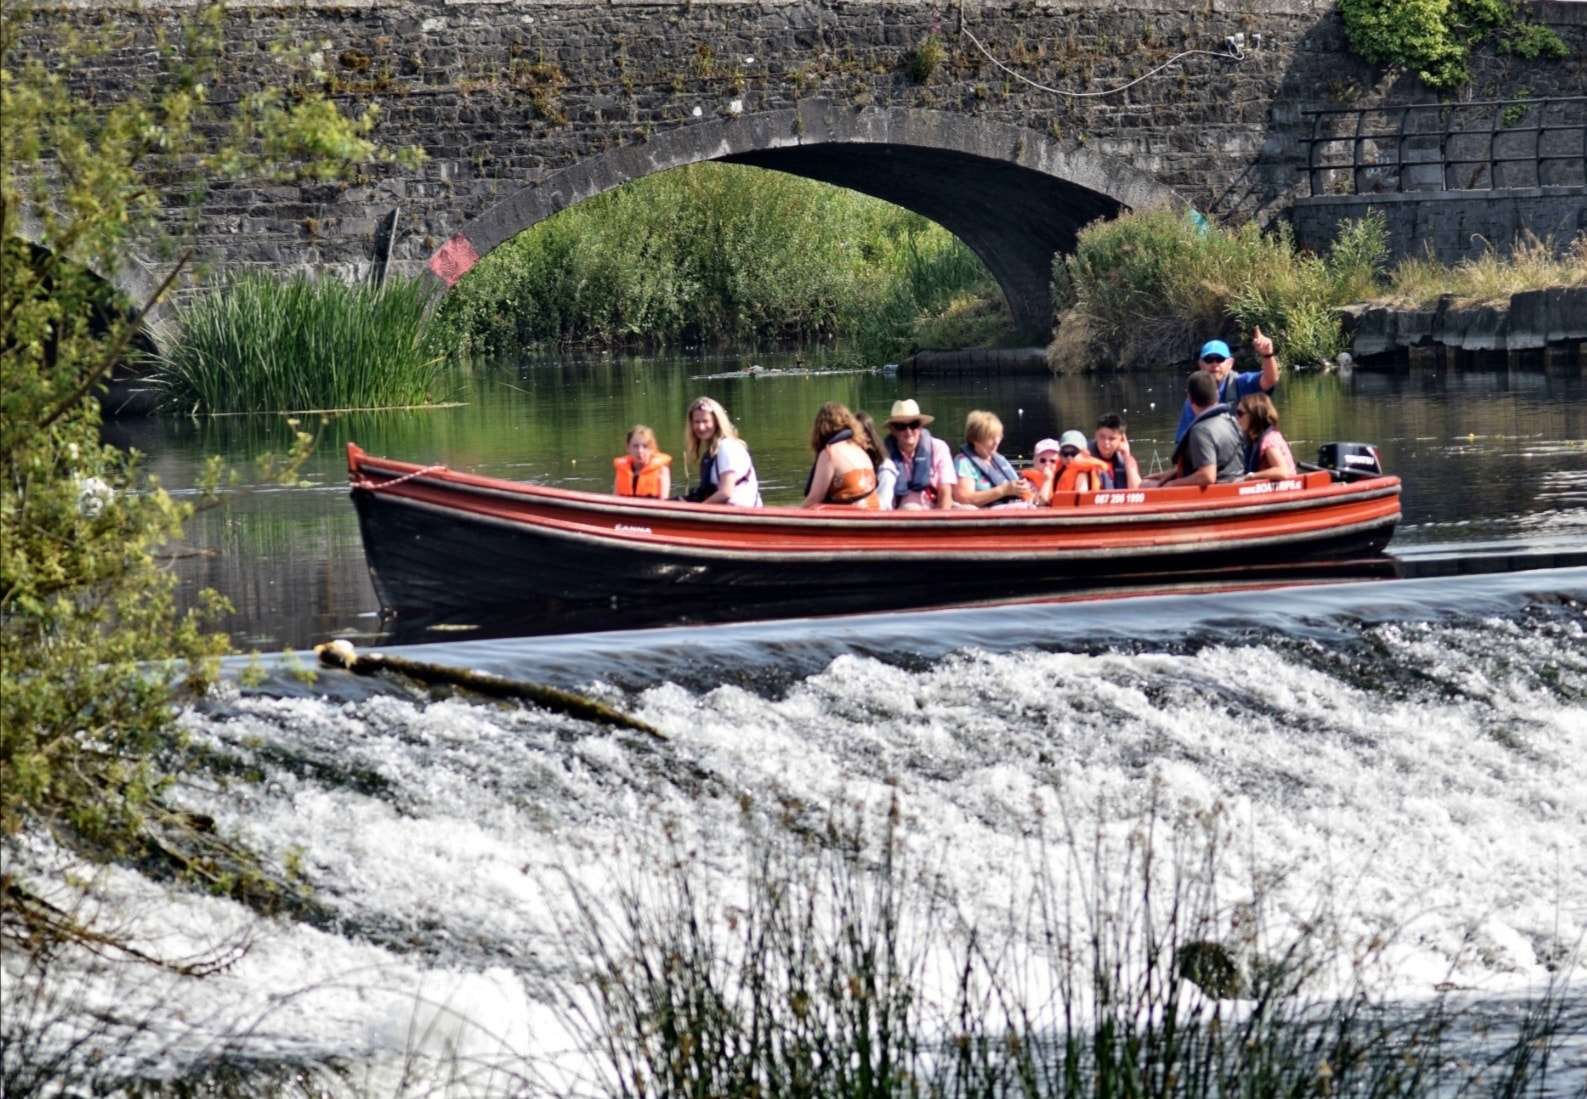 A guided boat trip with Cliff Reid of BoatTrips.ie